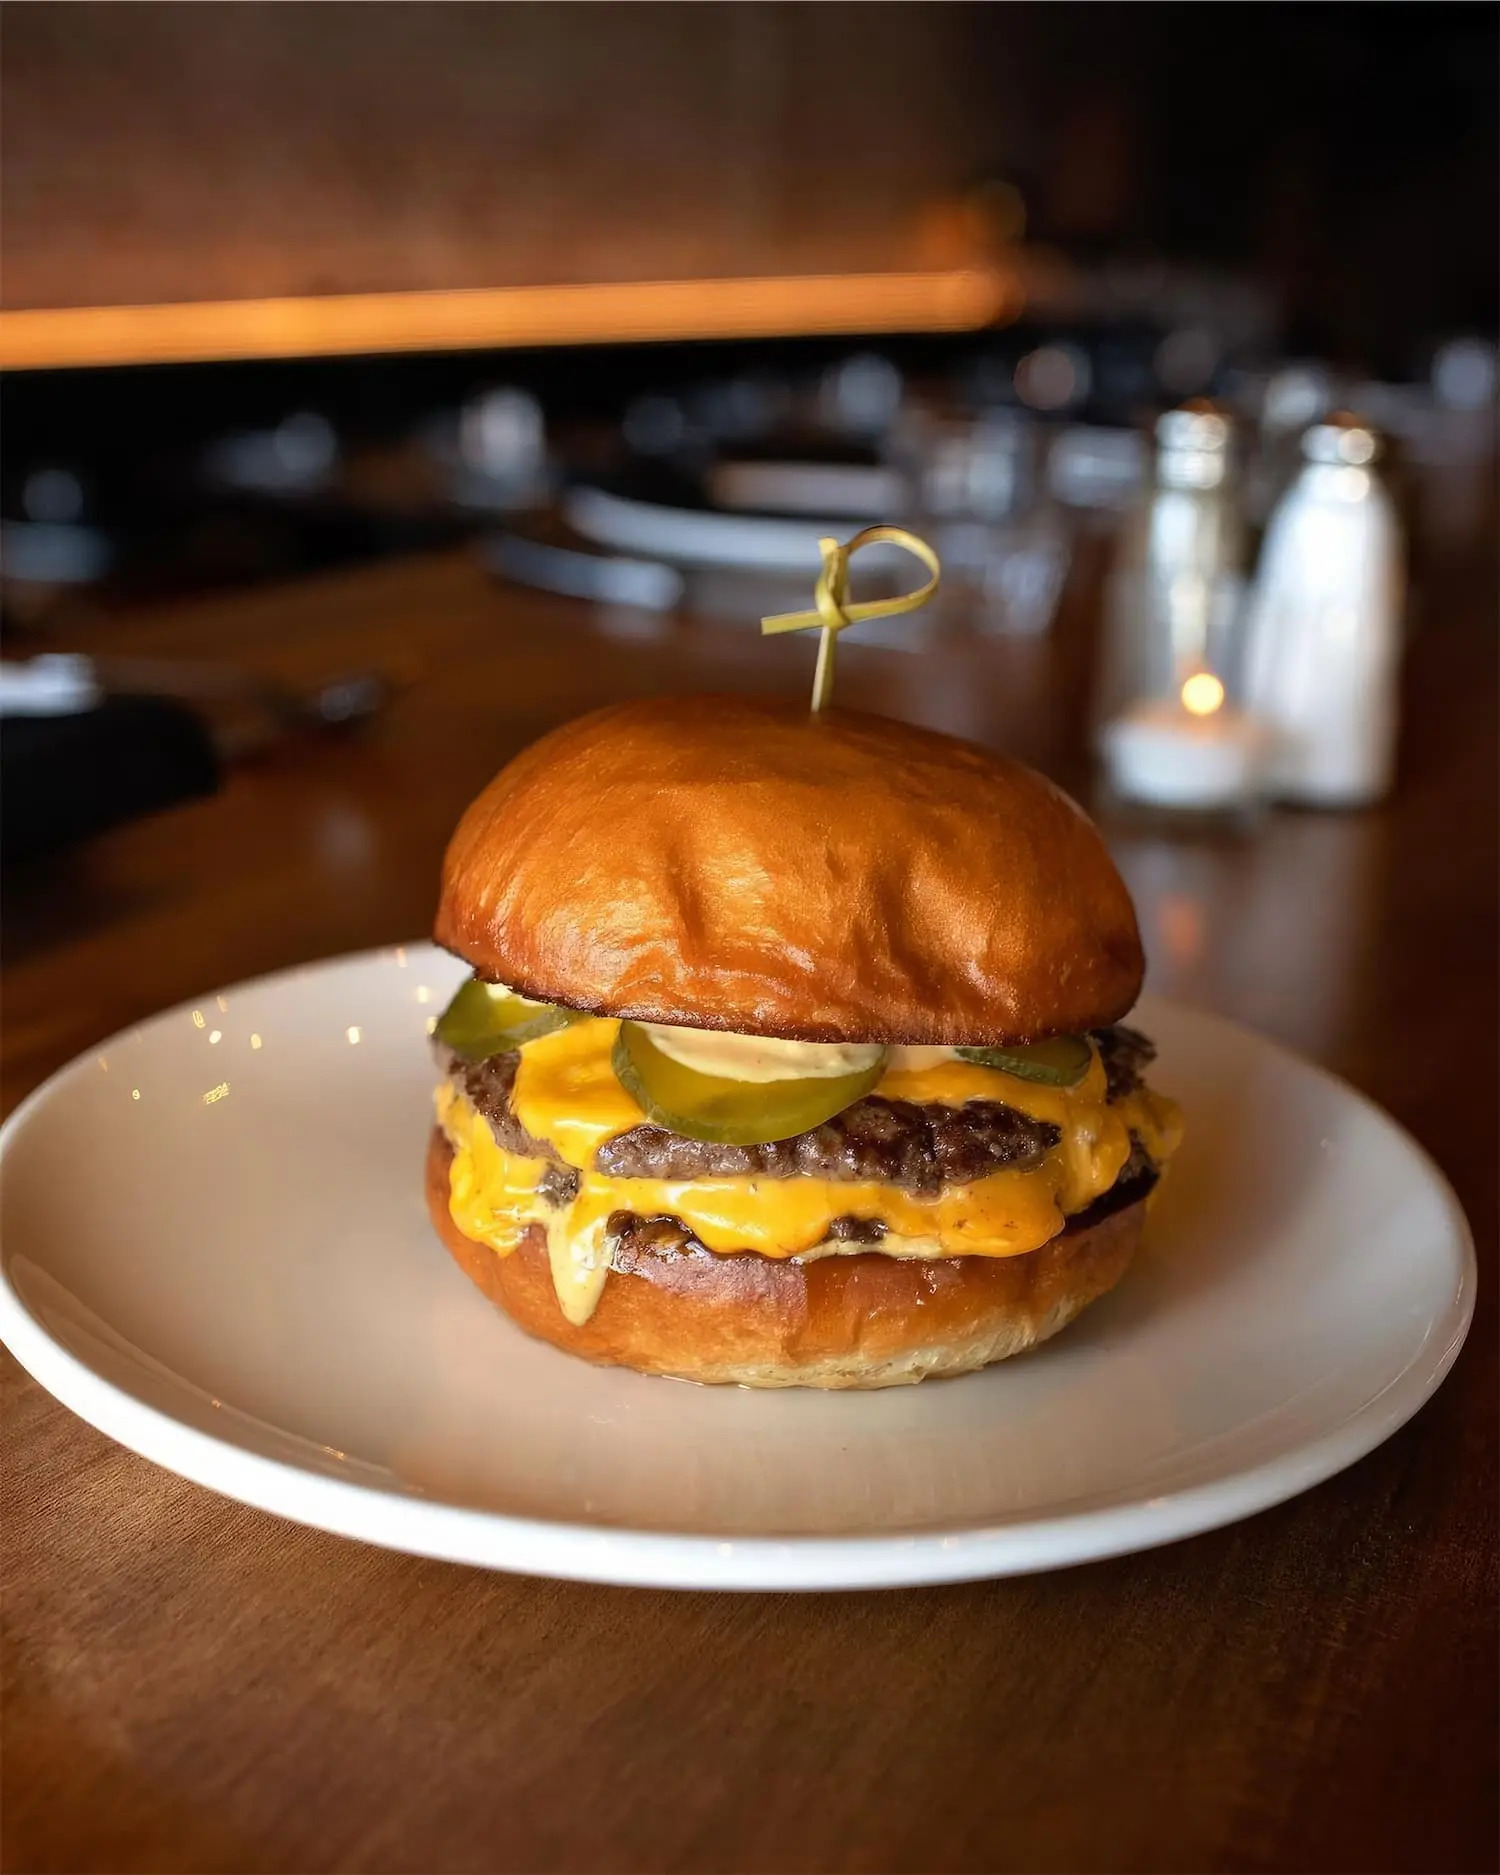 A burger with pickles and American cheese on a brioche bun.